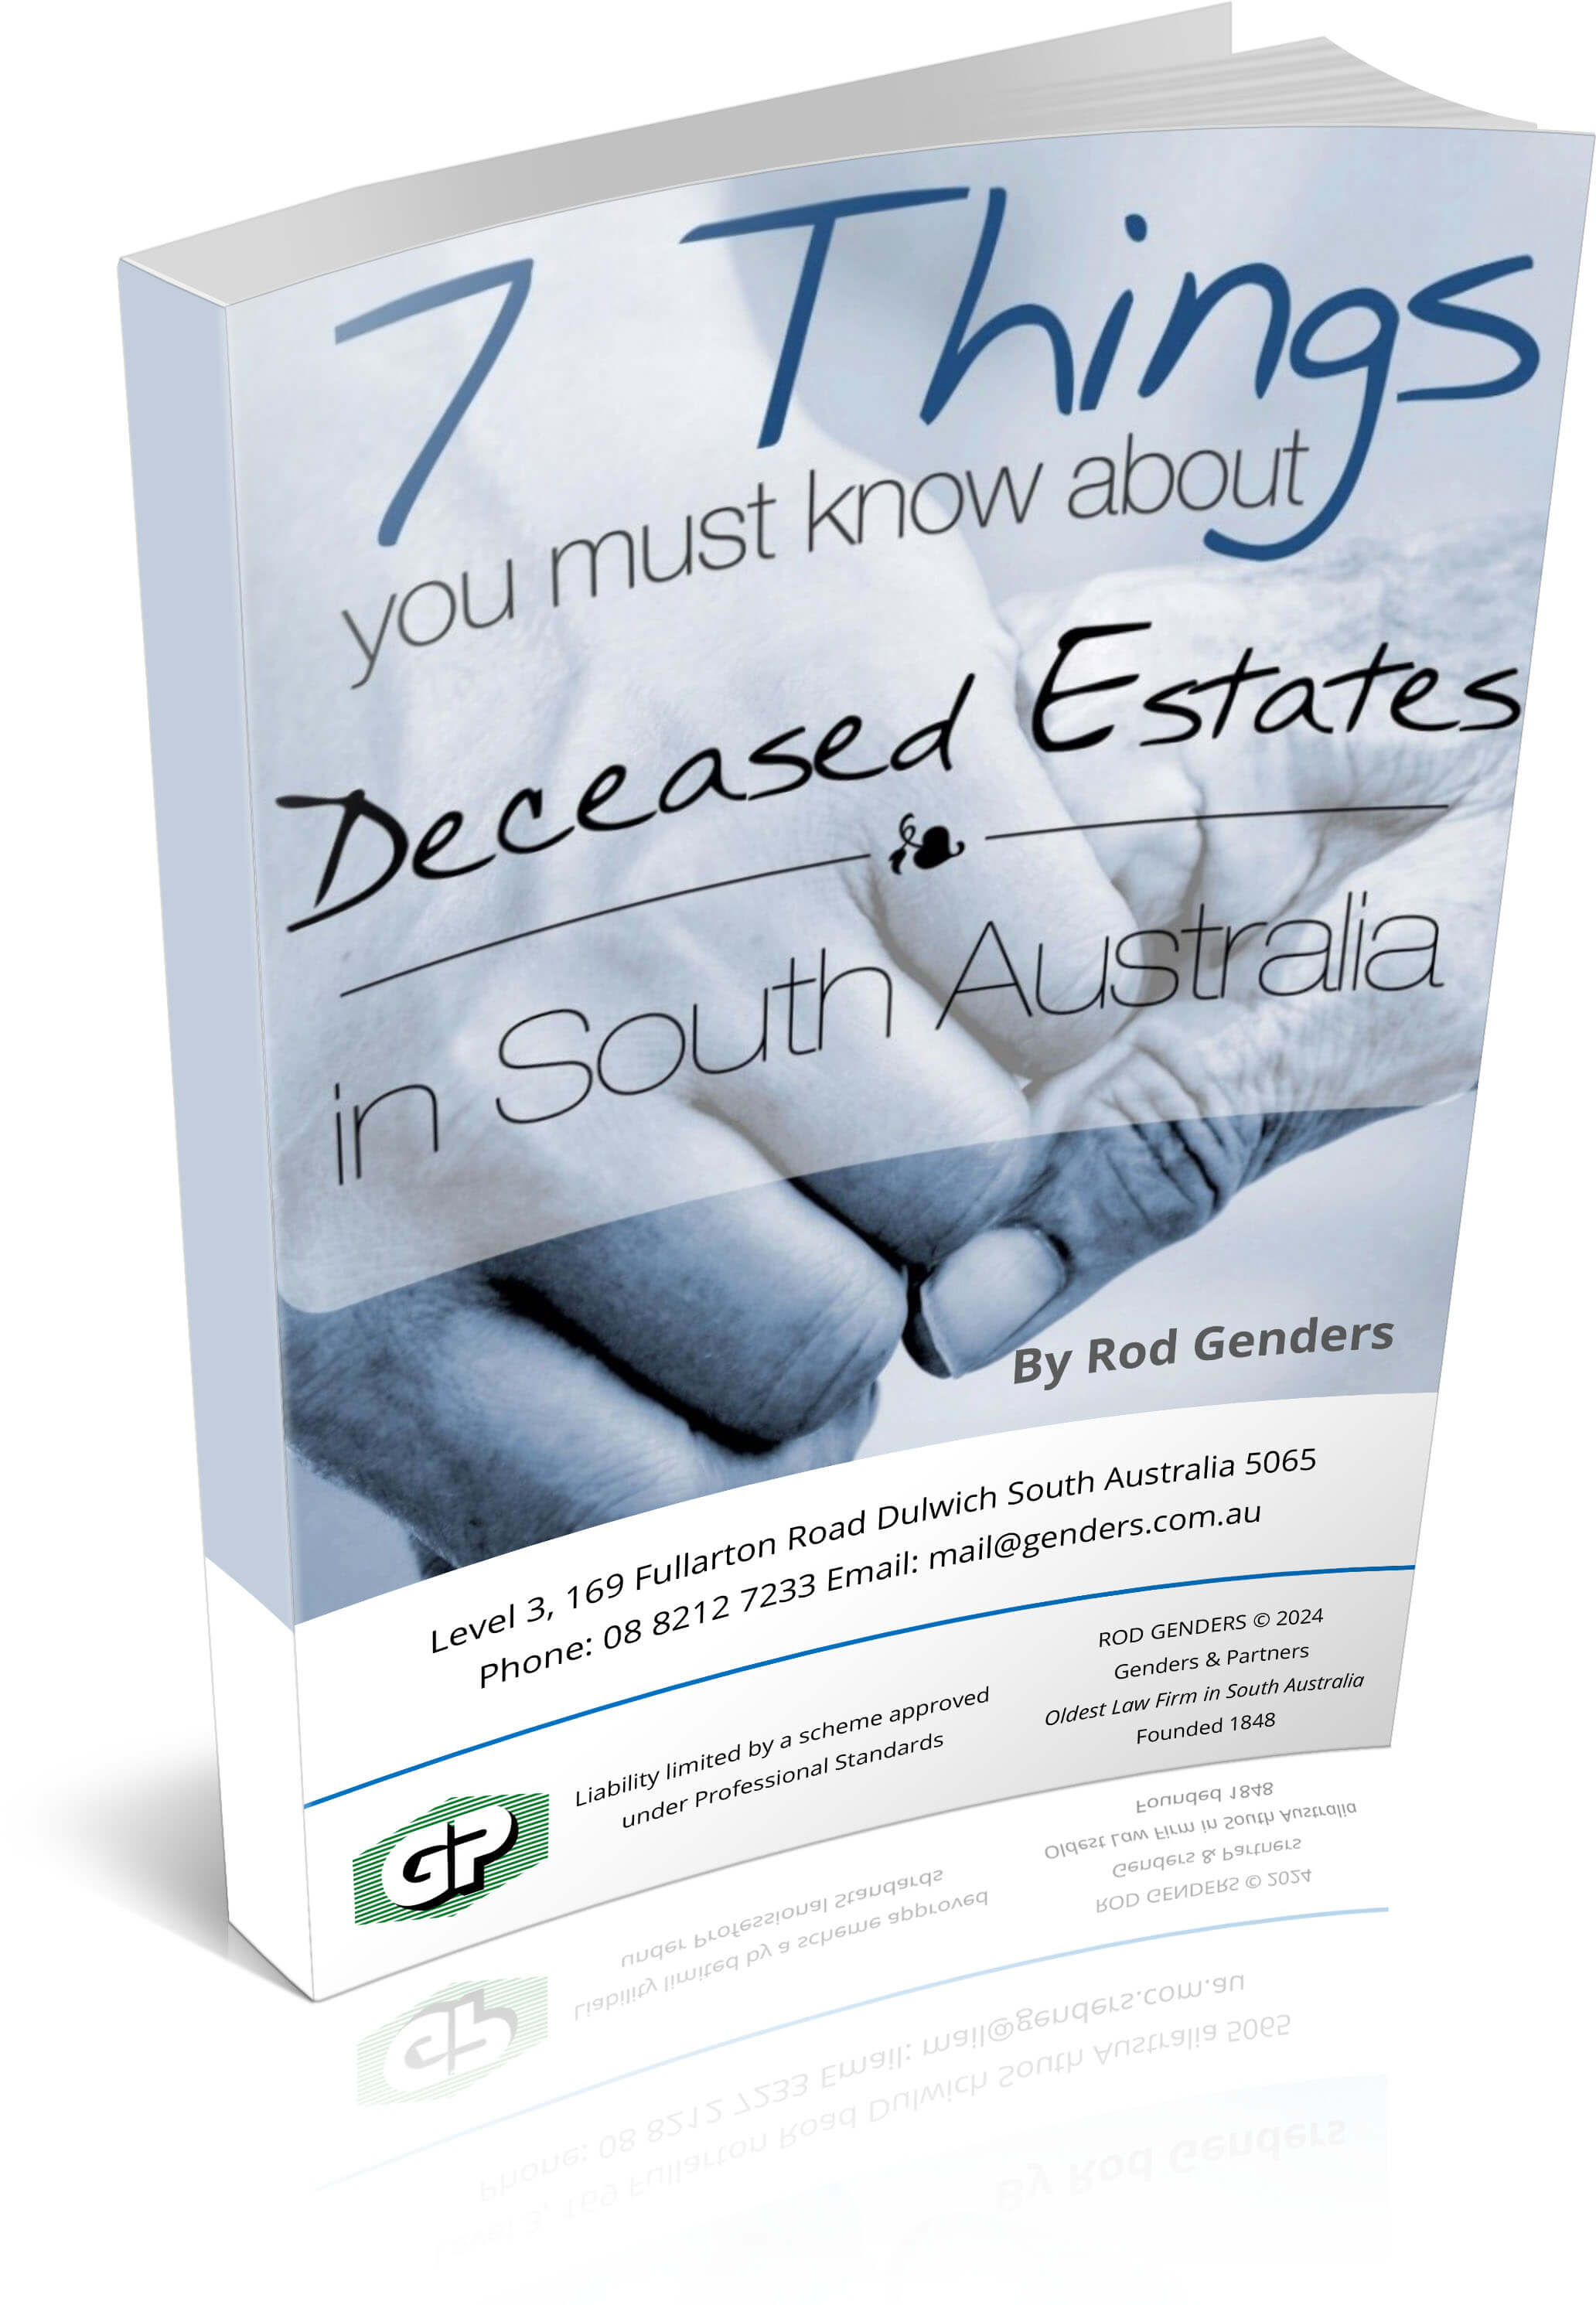 Genders-and-Partners-7-Things-You-Must-Know-about-deceased-estates-Lawyer-Adelaide